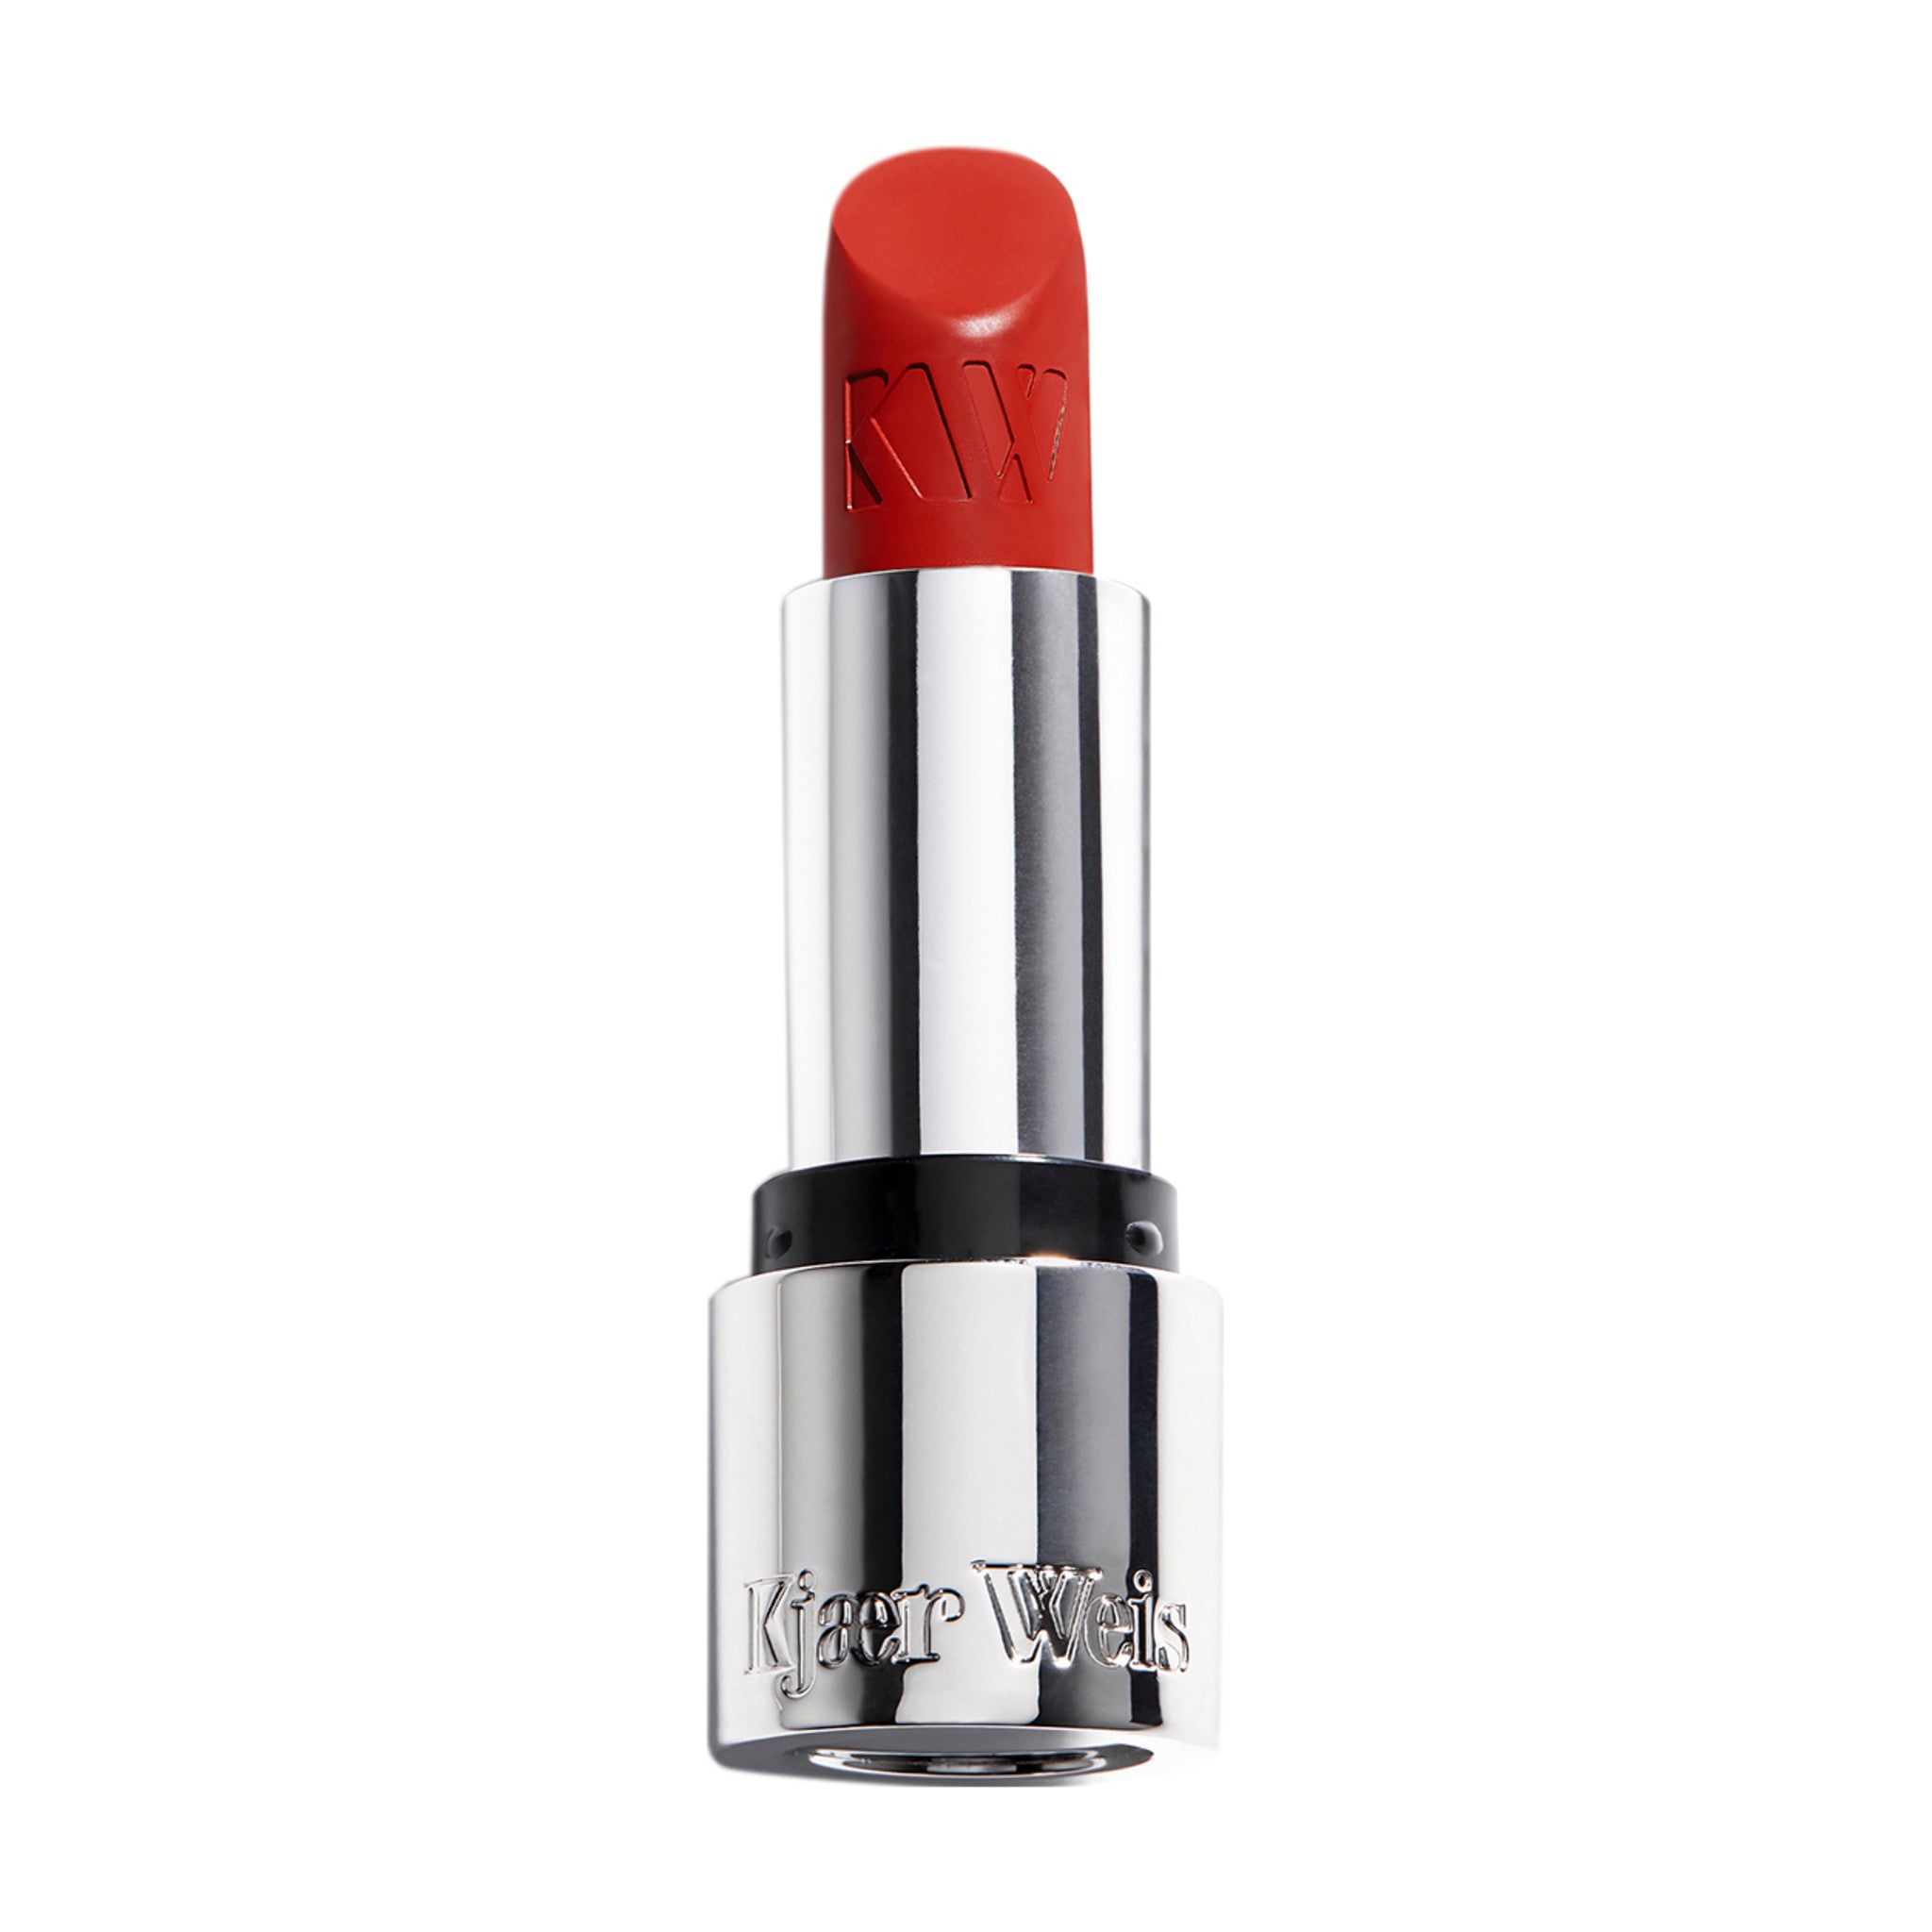 Kjaer Weis The Red Edit Lipstick Color/Shade variant: Euphoria main image. This product is in the color red